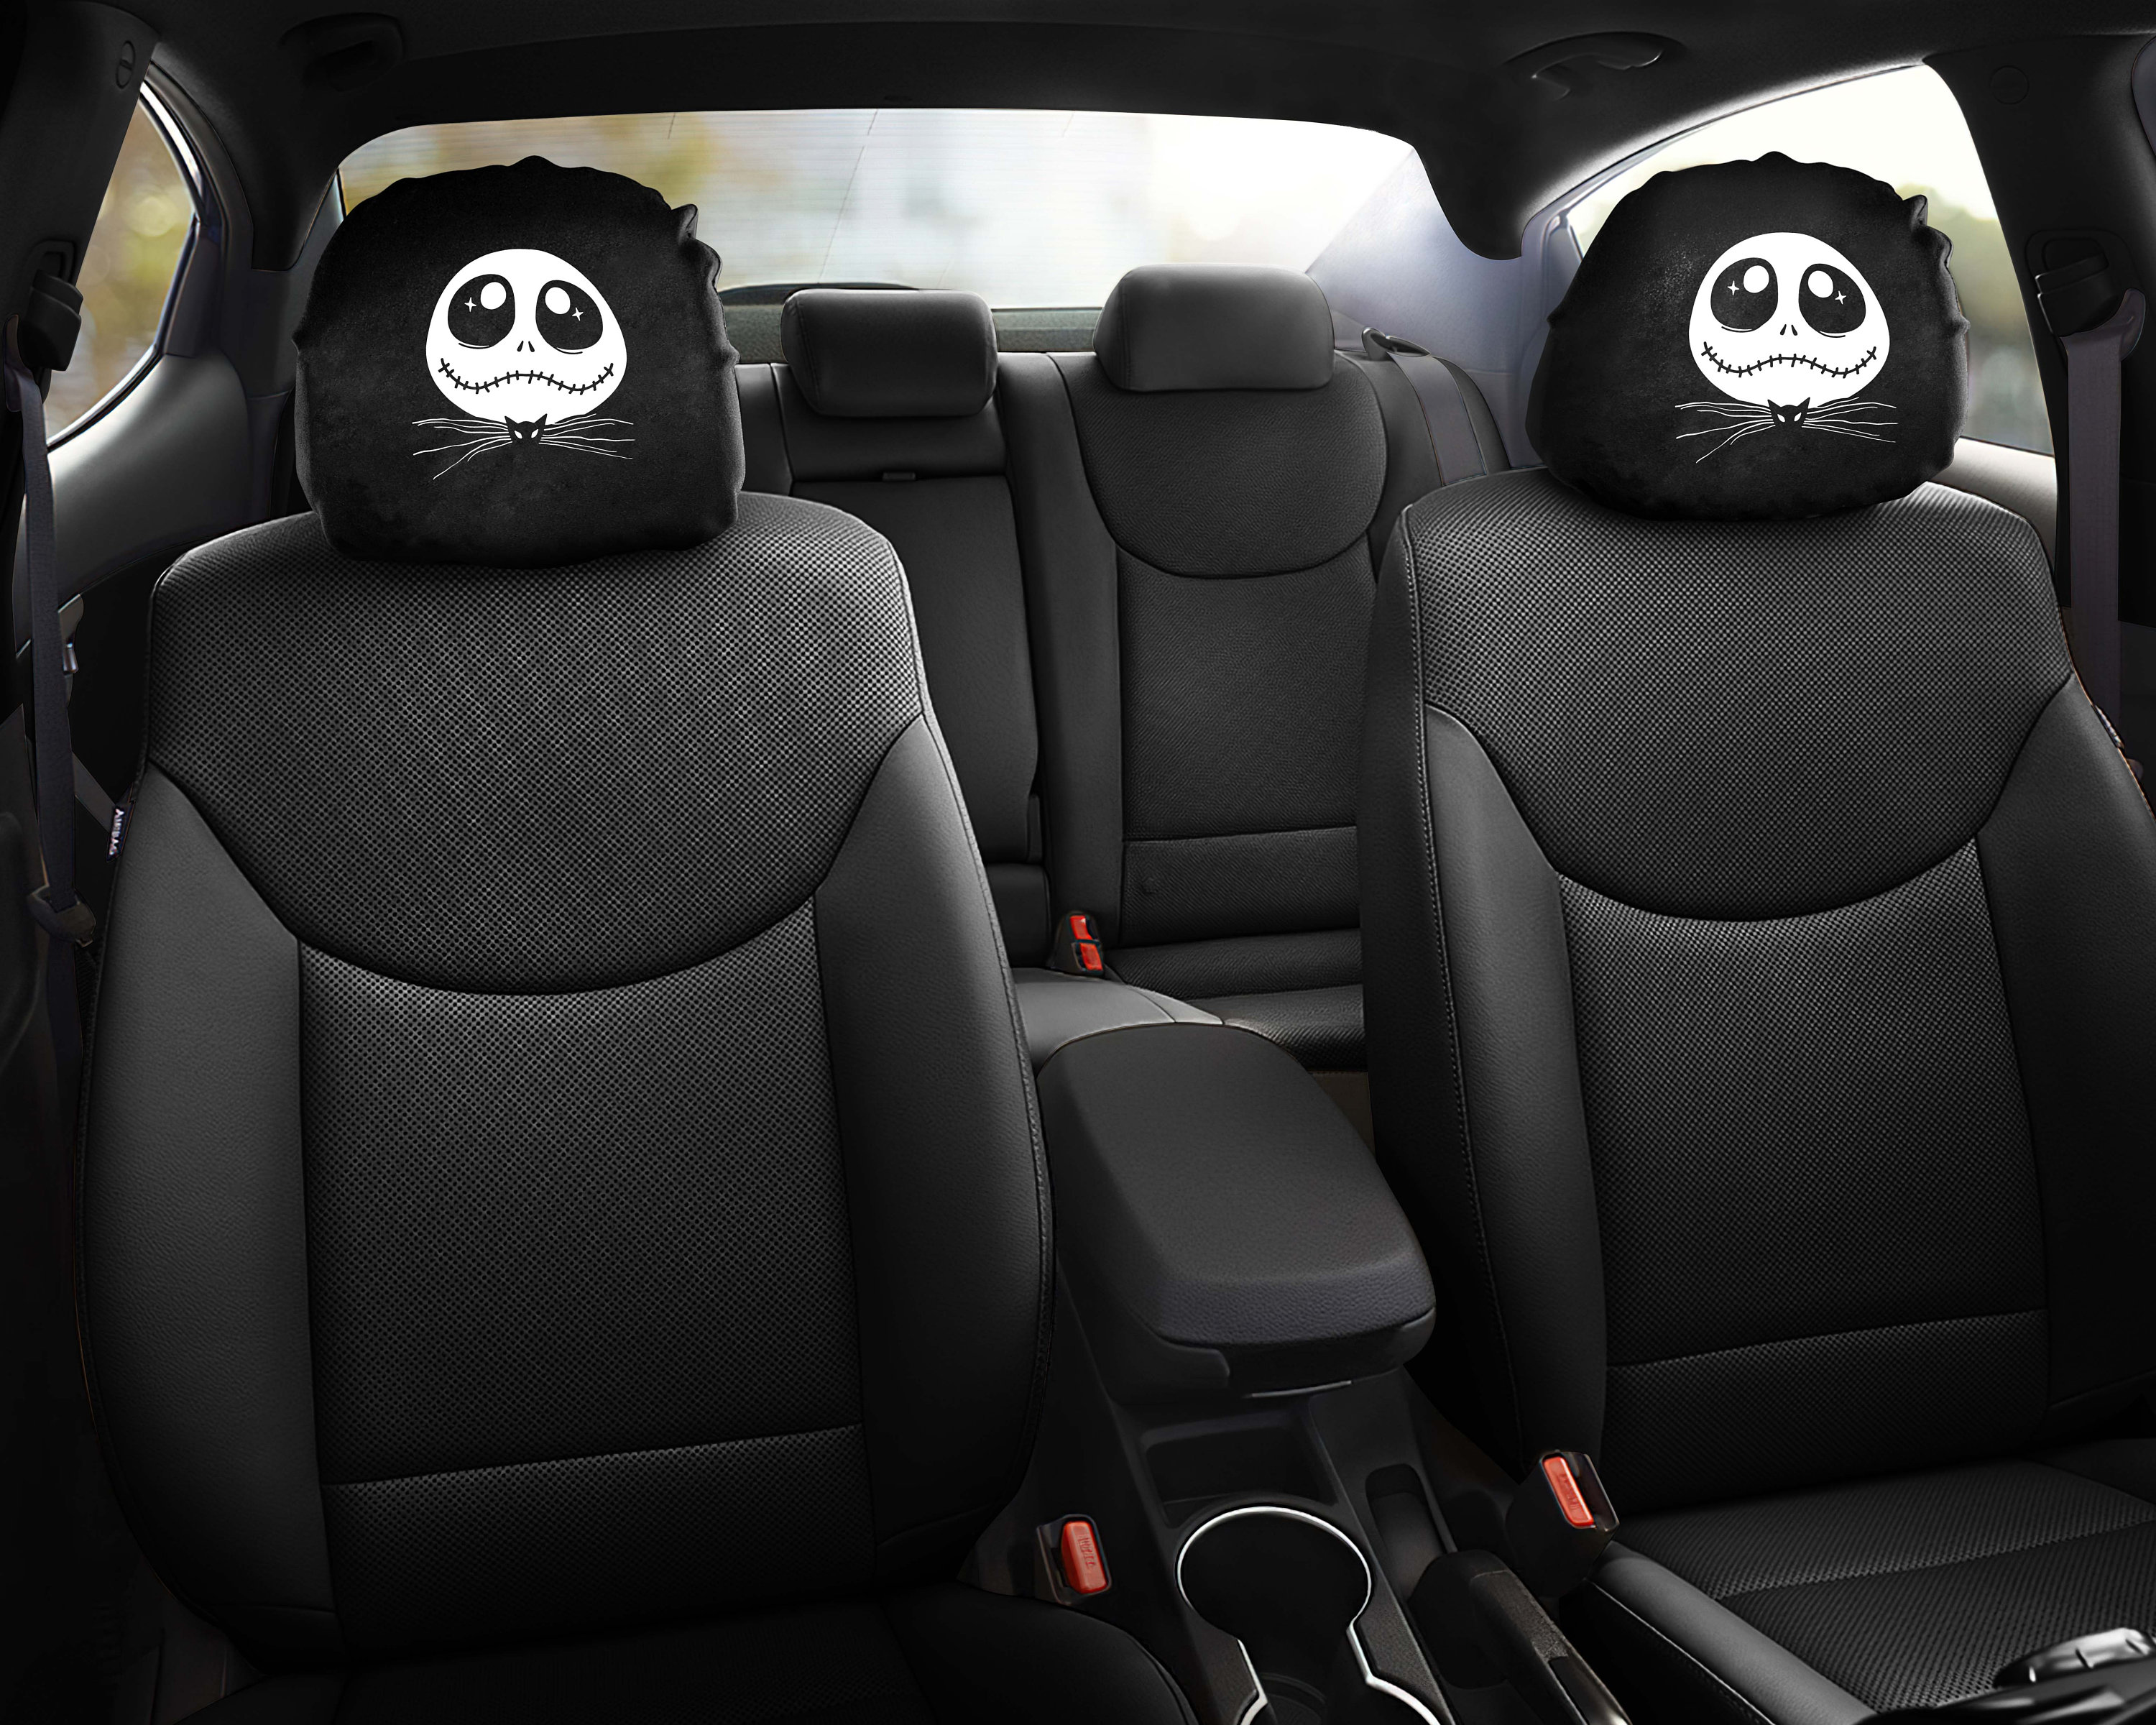 Father's Day Gift, Car Decor Headrest Covers, Cute Jack Skellington Face - Halloween Gift Set 2 Headrest Cover, Gift For Mom Car Accessories